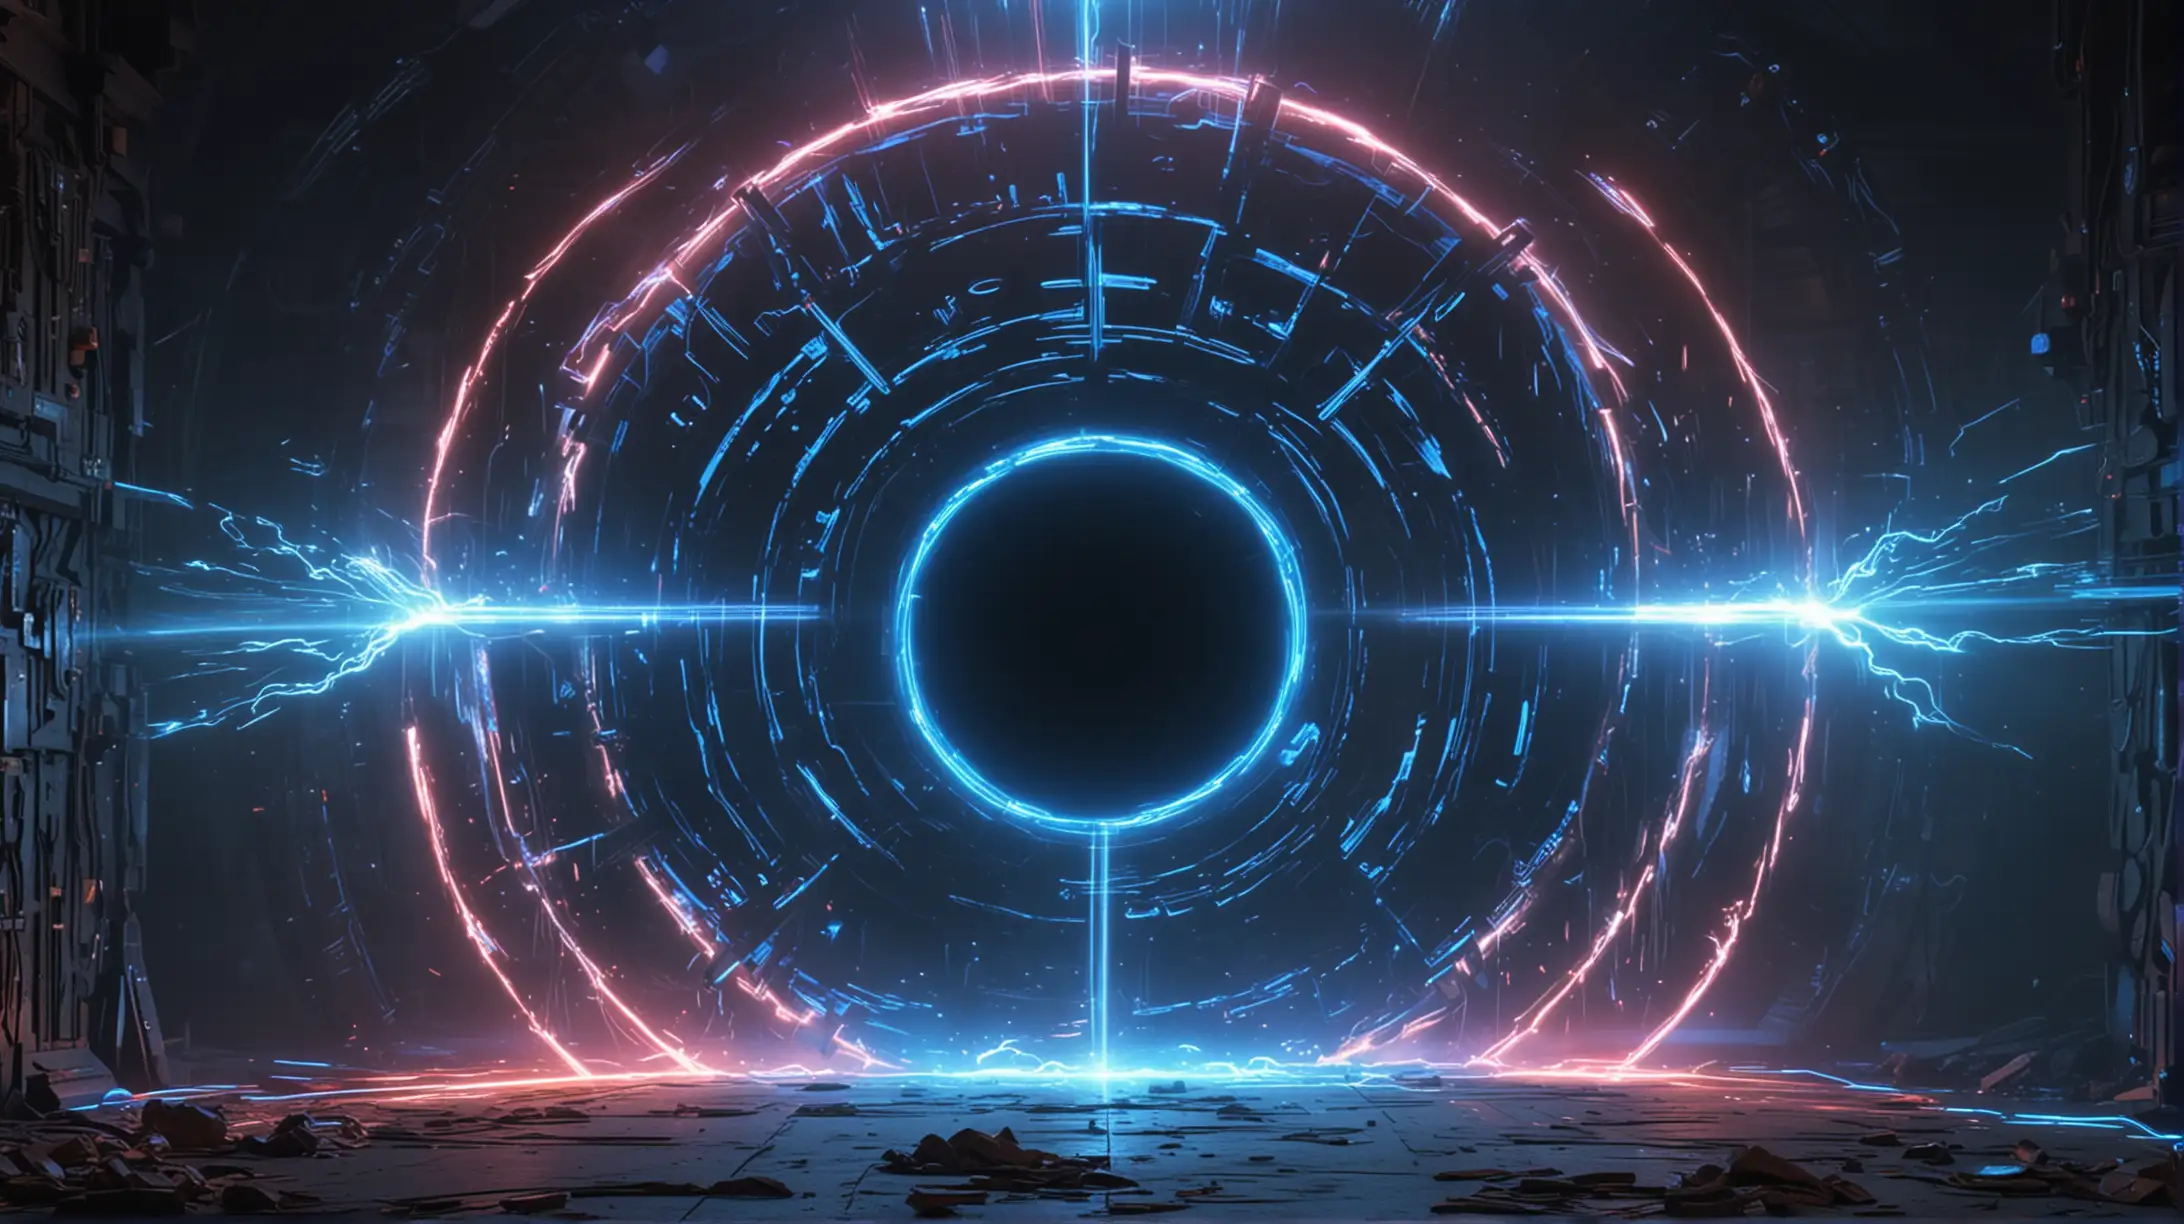 Large Circular Time Portal with Neon Glowing Lights and Electric Blue Lasers